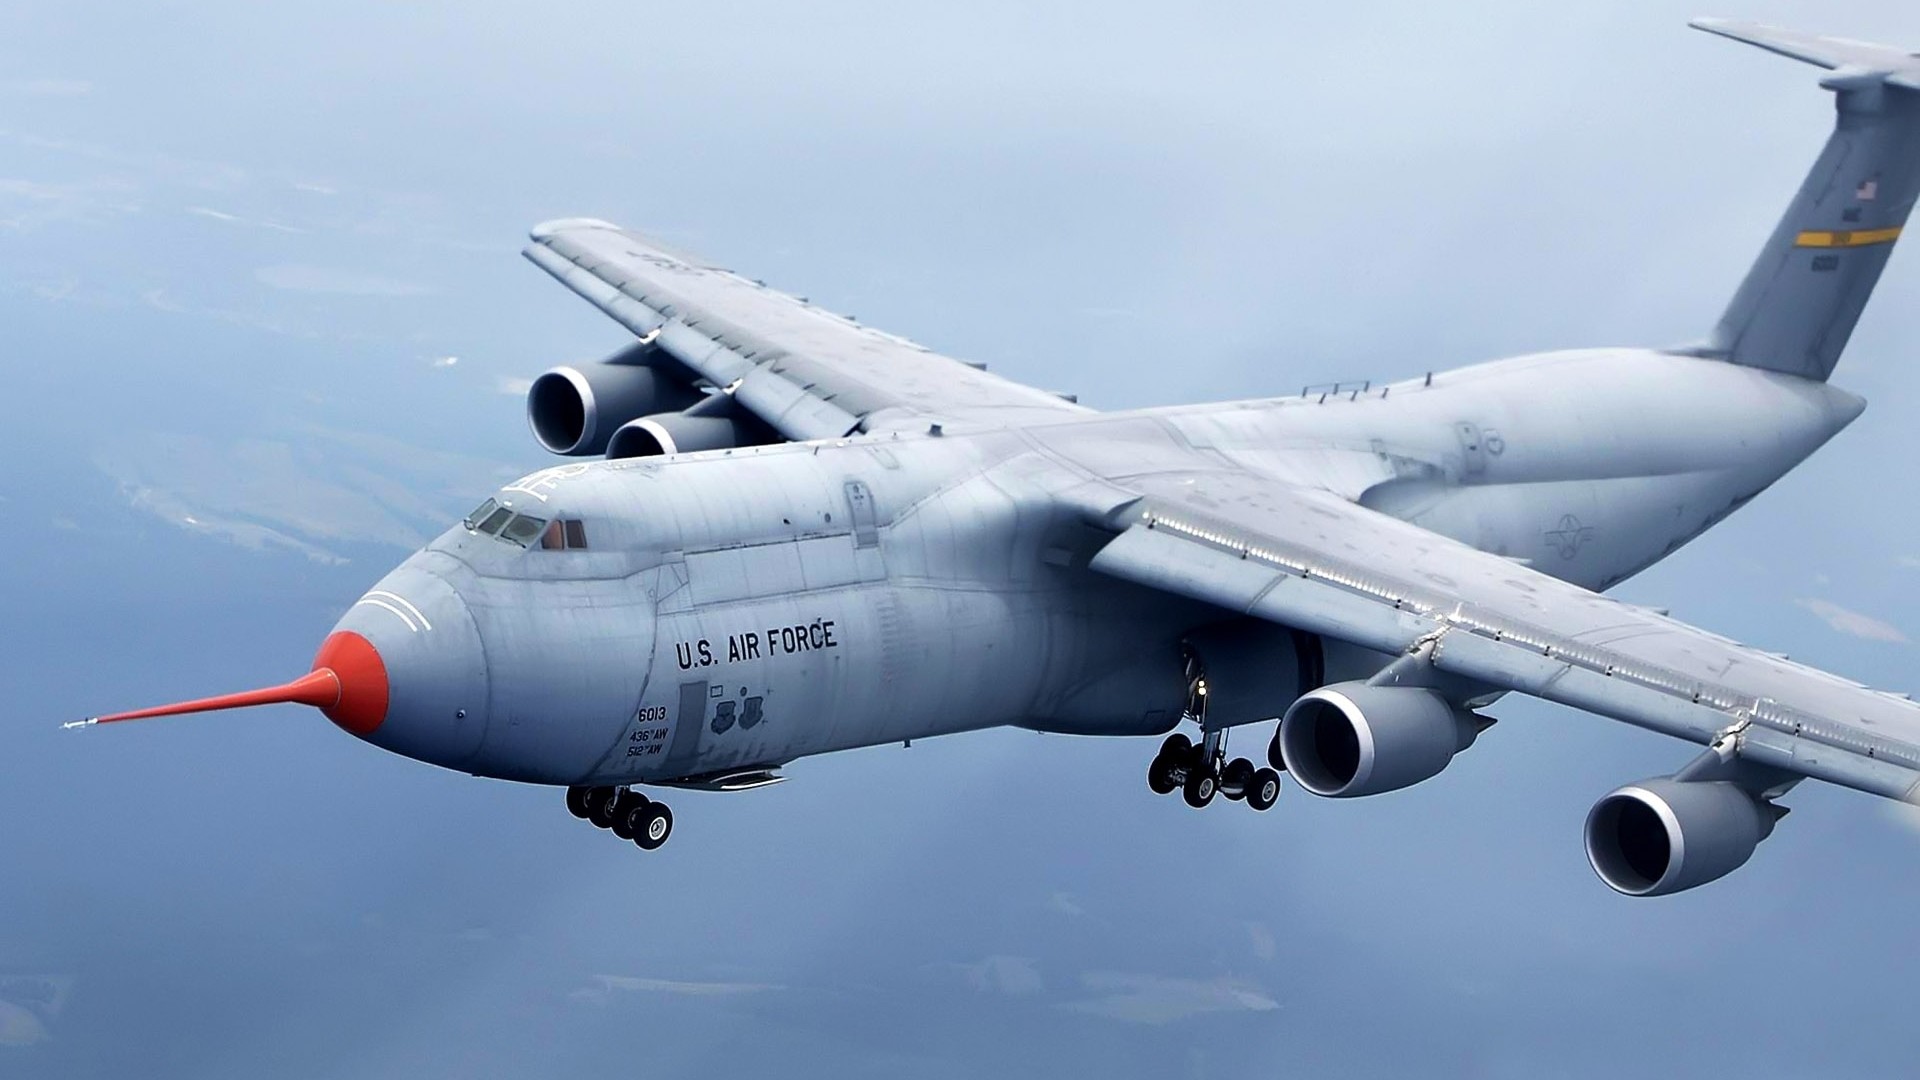 1920x1080 C 5 Galaxy US Air Force wallpapers Wallpapers) – HD Wallpapers